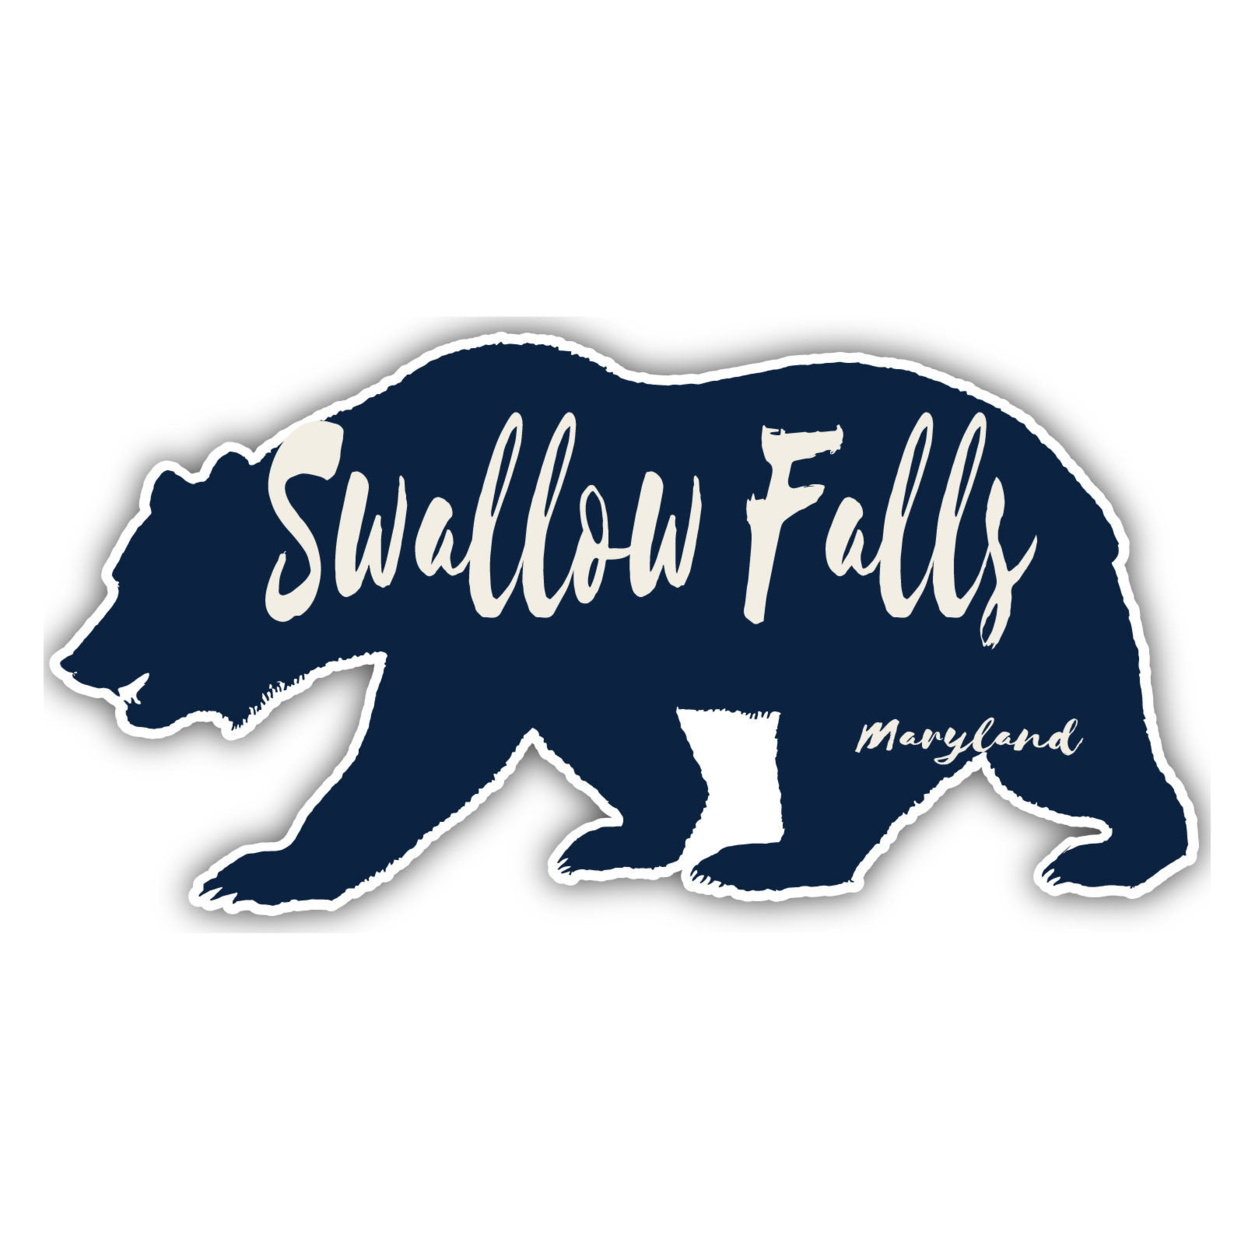 Swallow Falls Maryland Souvenir Decorative Stickers (Choose Theme And Size) - Single Unit, 4-Inch, Bear